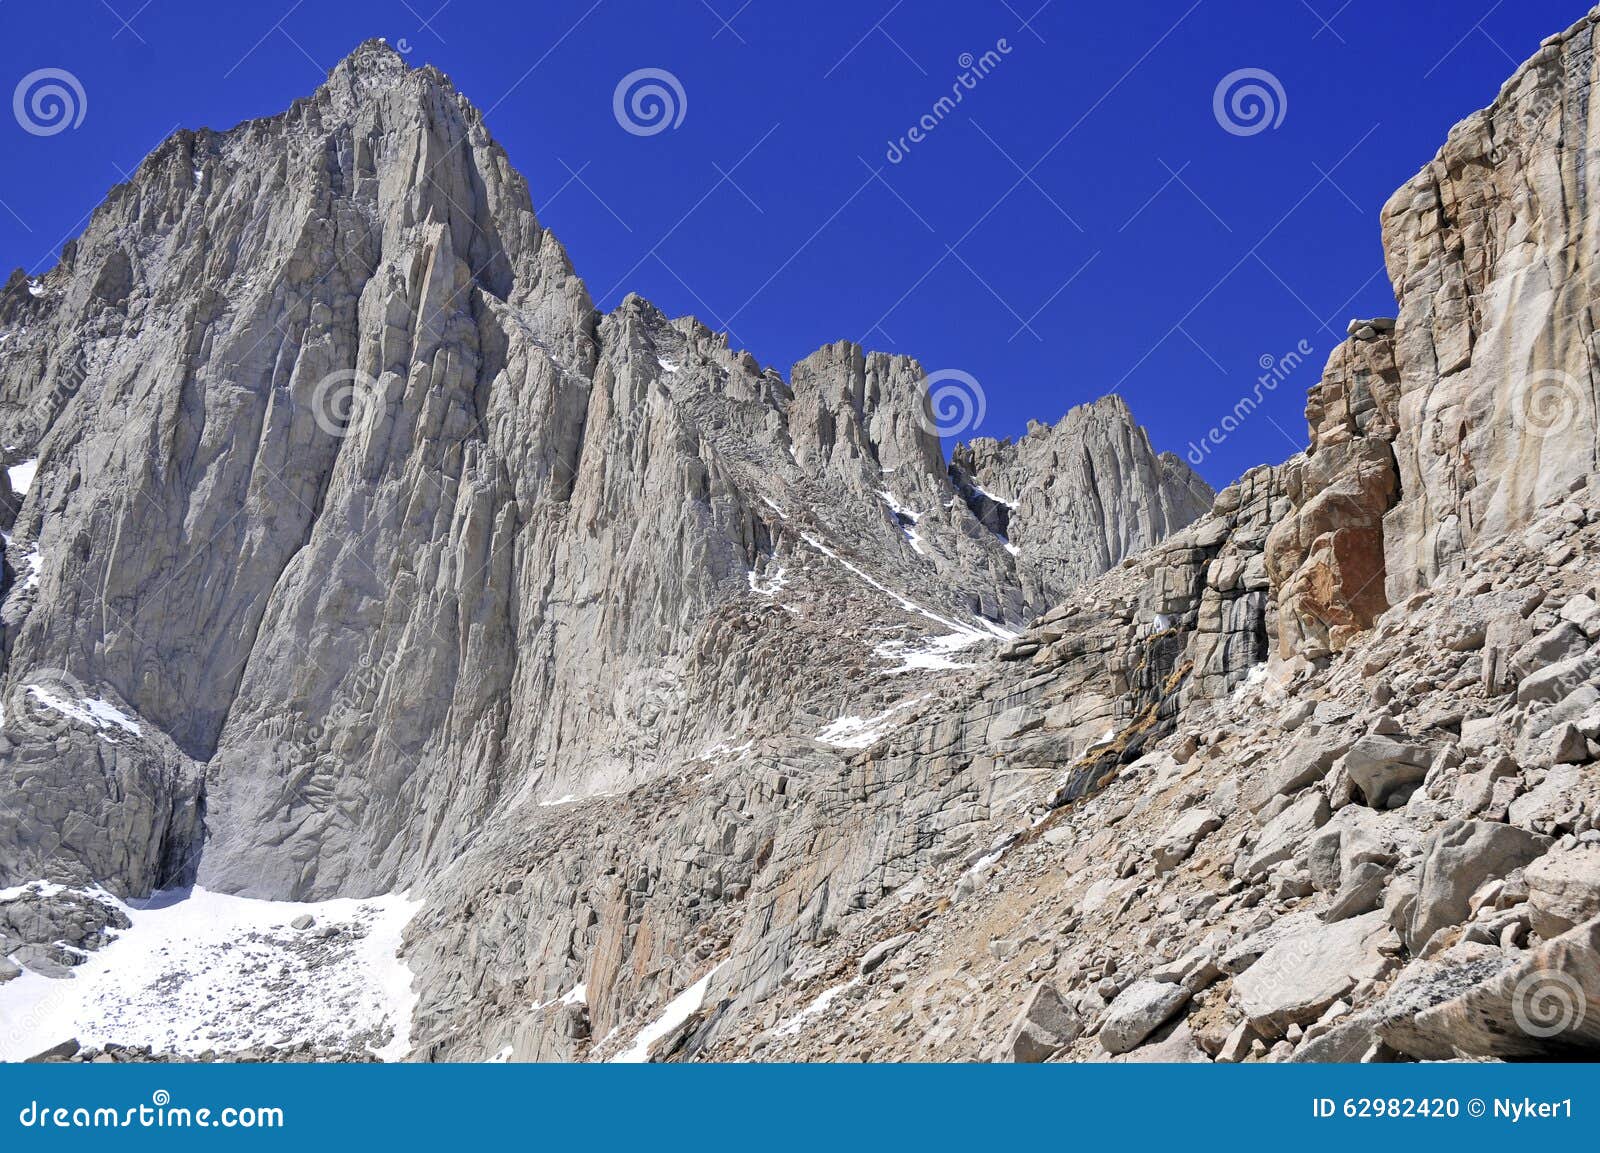 mount whitney, california 14er and state high point